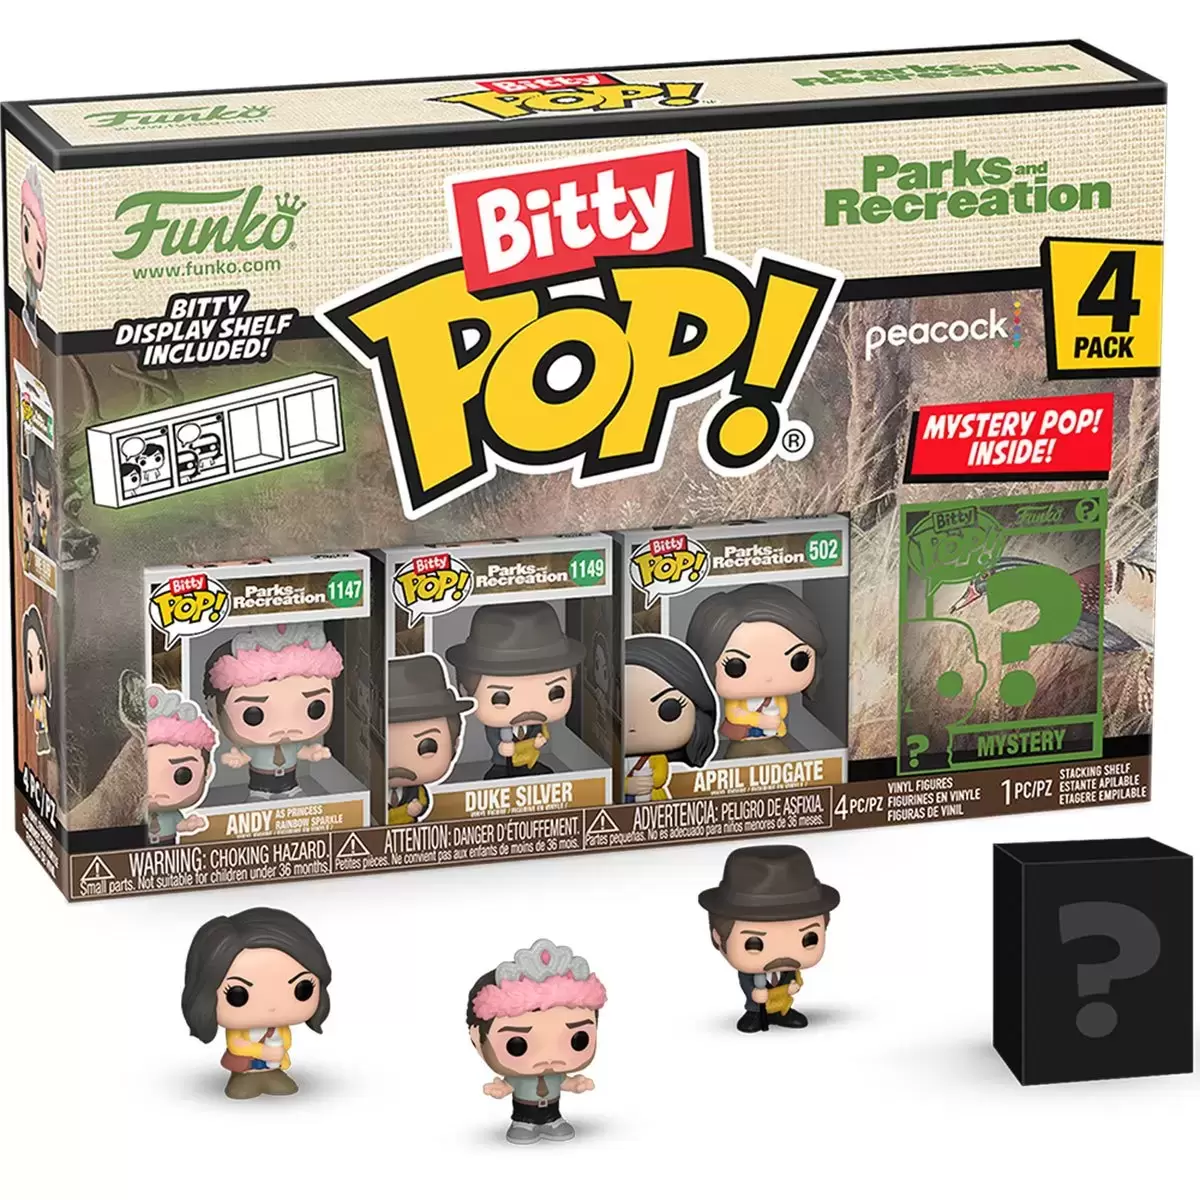 Bitty POP! - Parks And Recreation - Andy, Duke Silver, April Ludgate  & Mystery